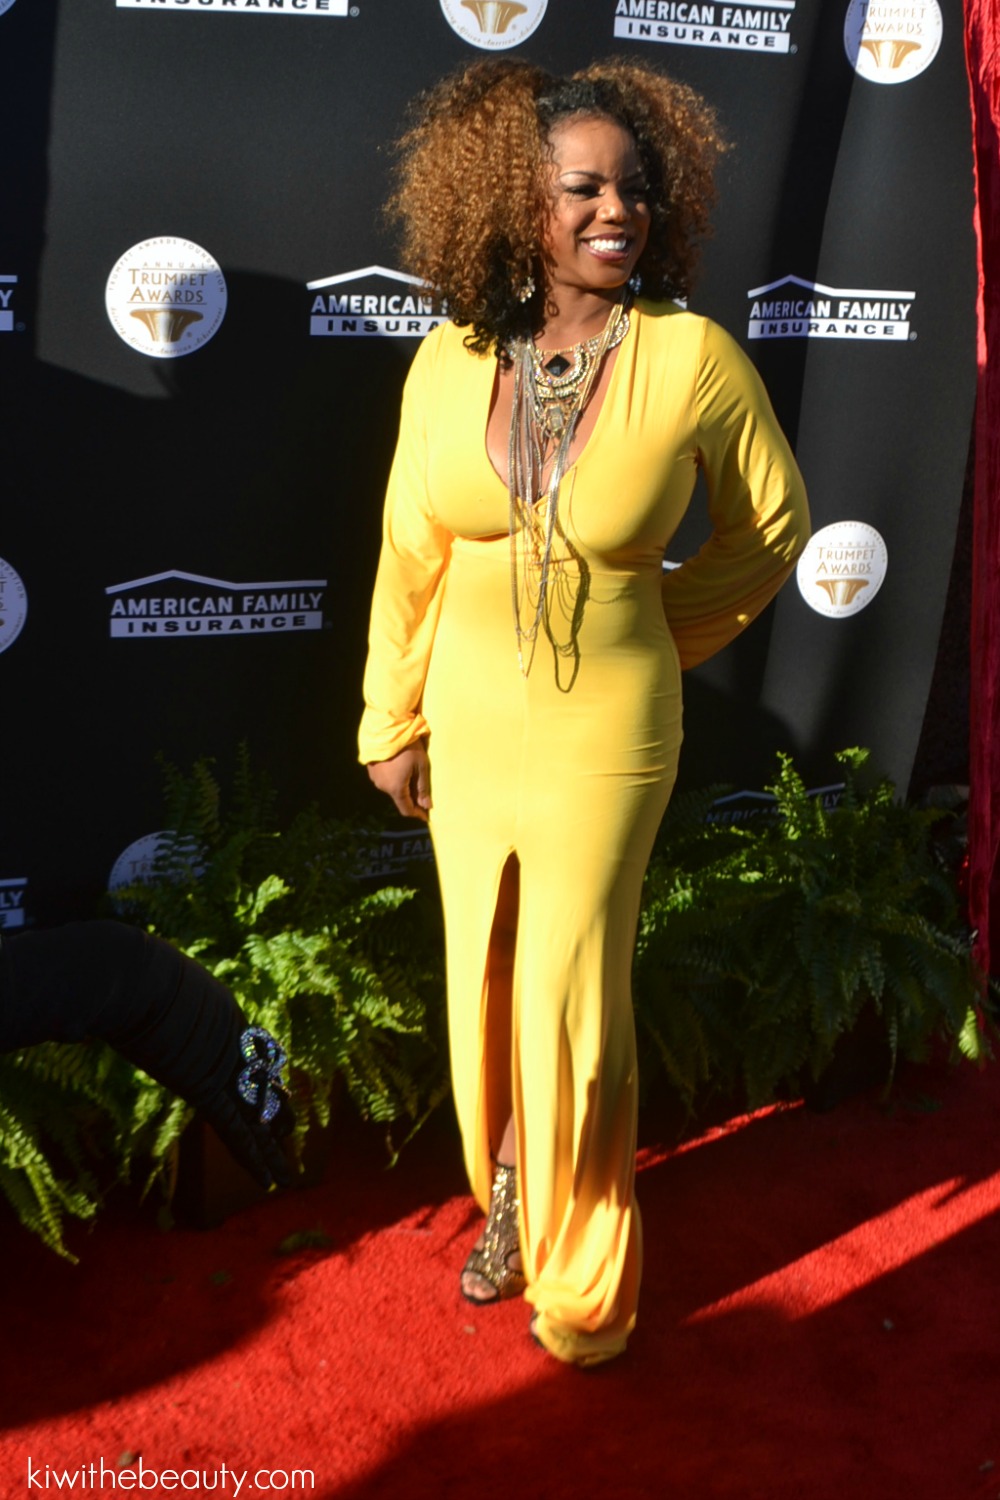 trumpet-awards-23rd-annual-2015-4 - Copy